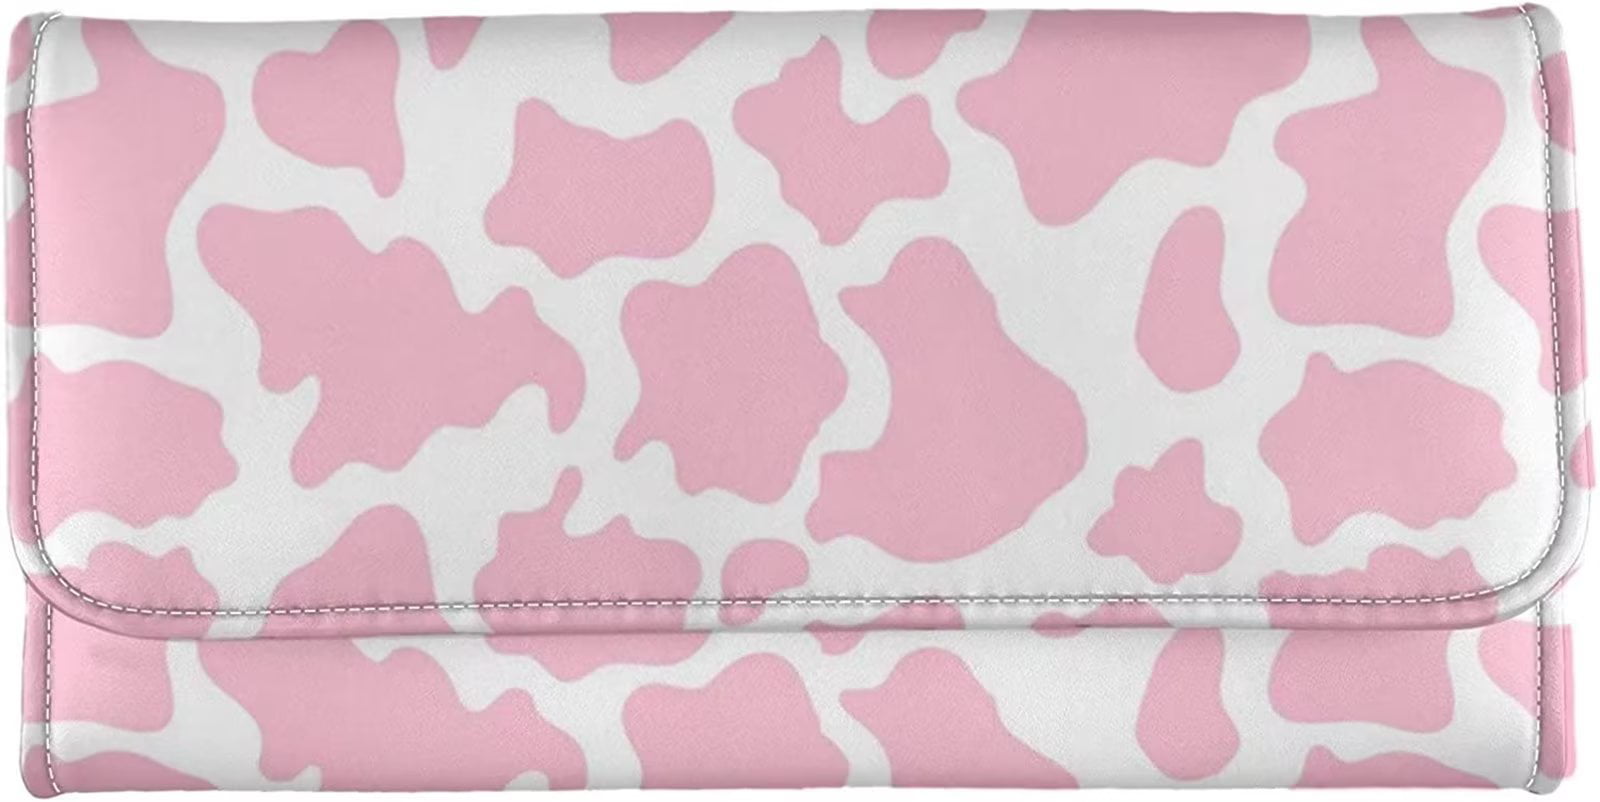 Fkelyi Pink Cow Print Zipper Wallets for Women and Girls,Credit Cards Phone Purse Pouch,Debit Cards Card Holder Organizer Wallet for Travel and Office